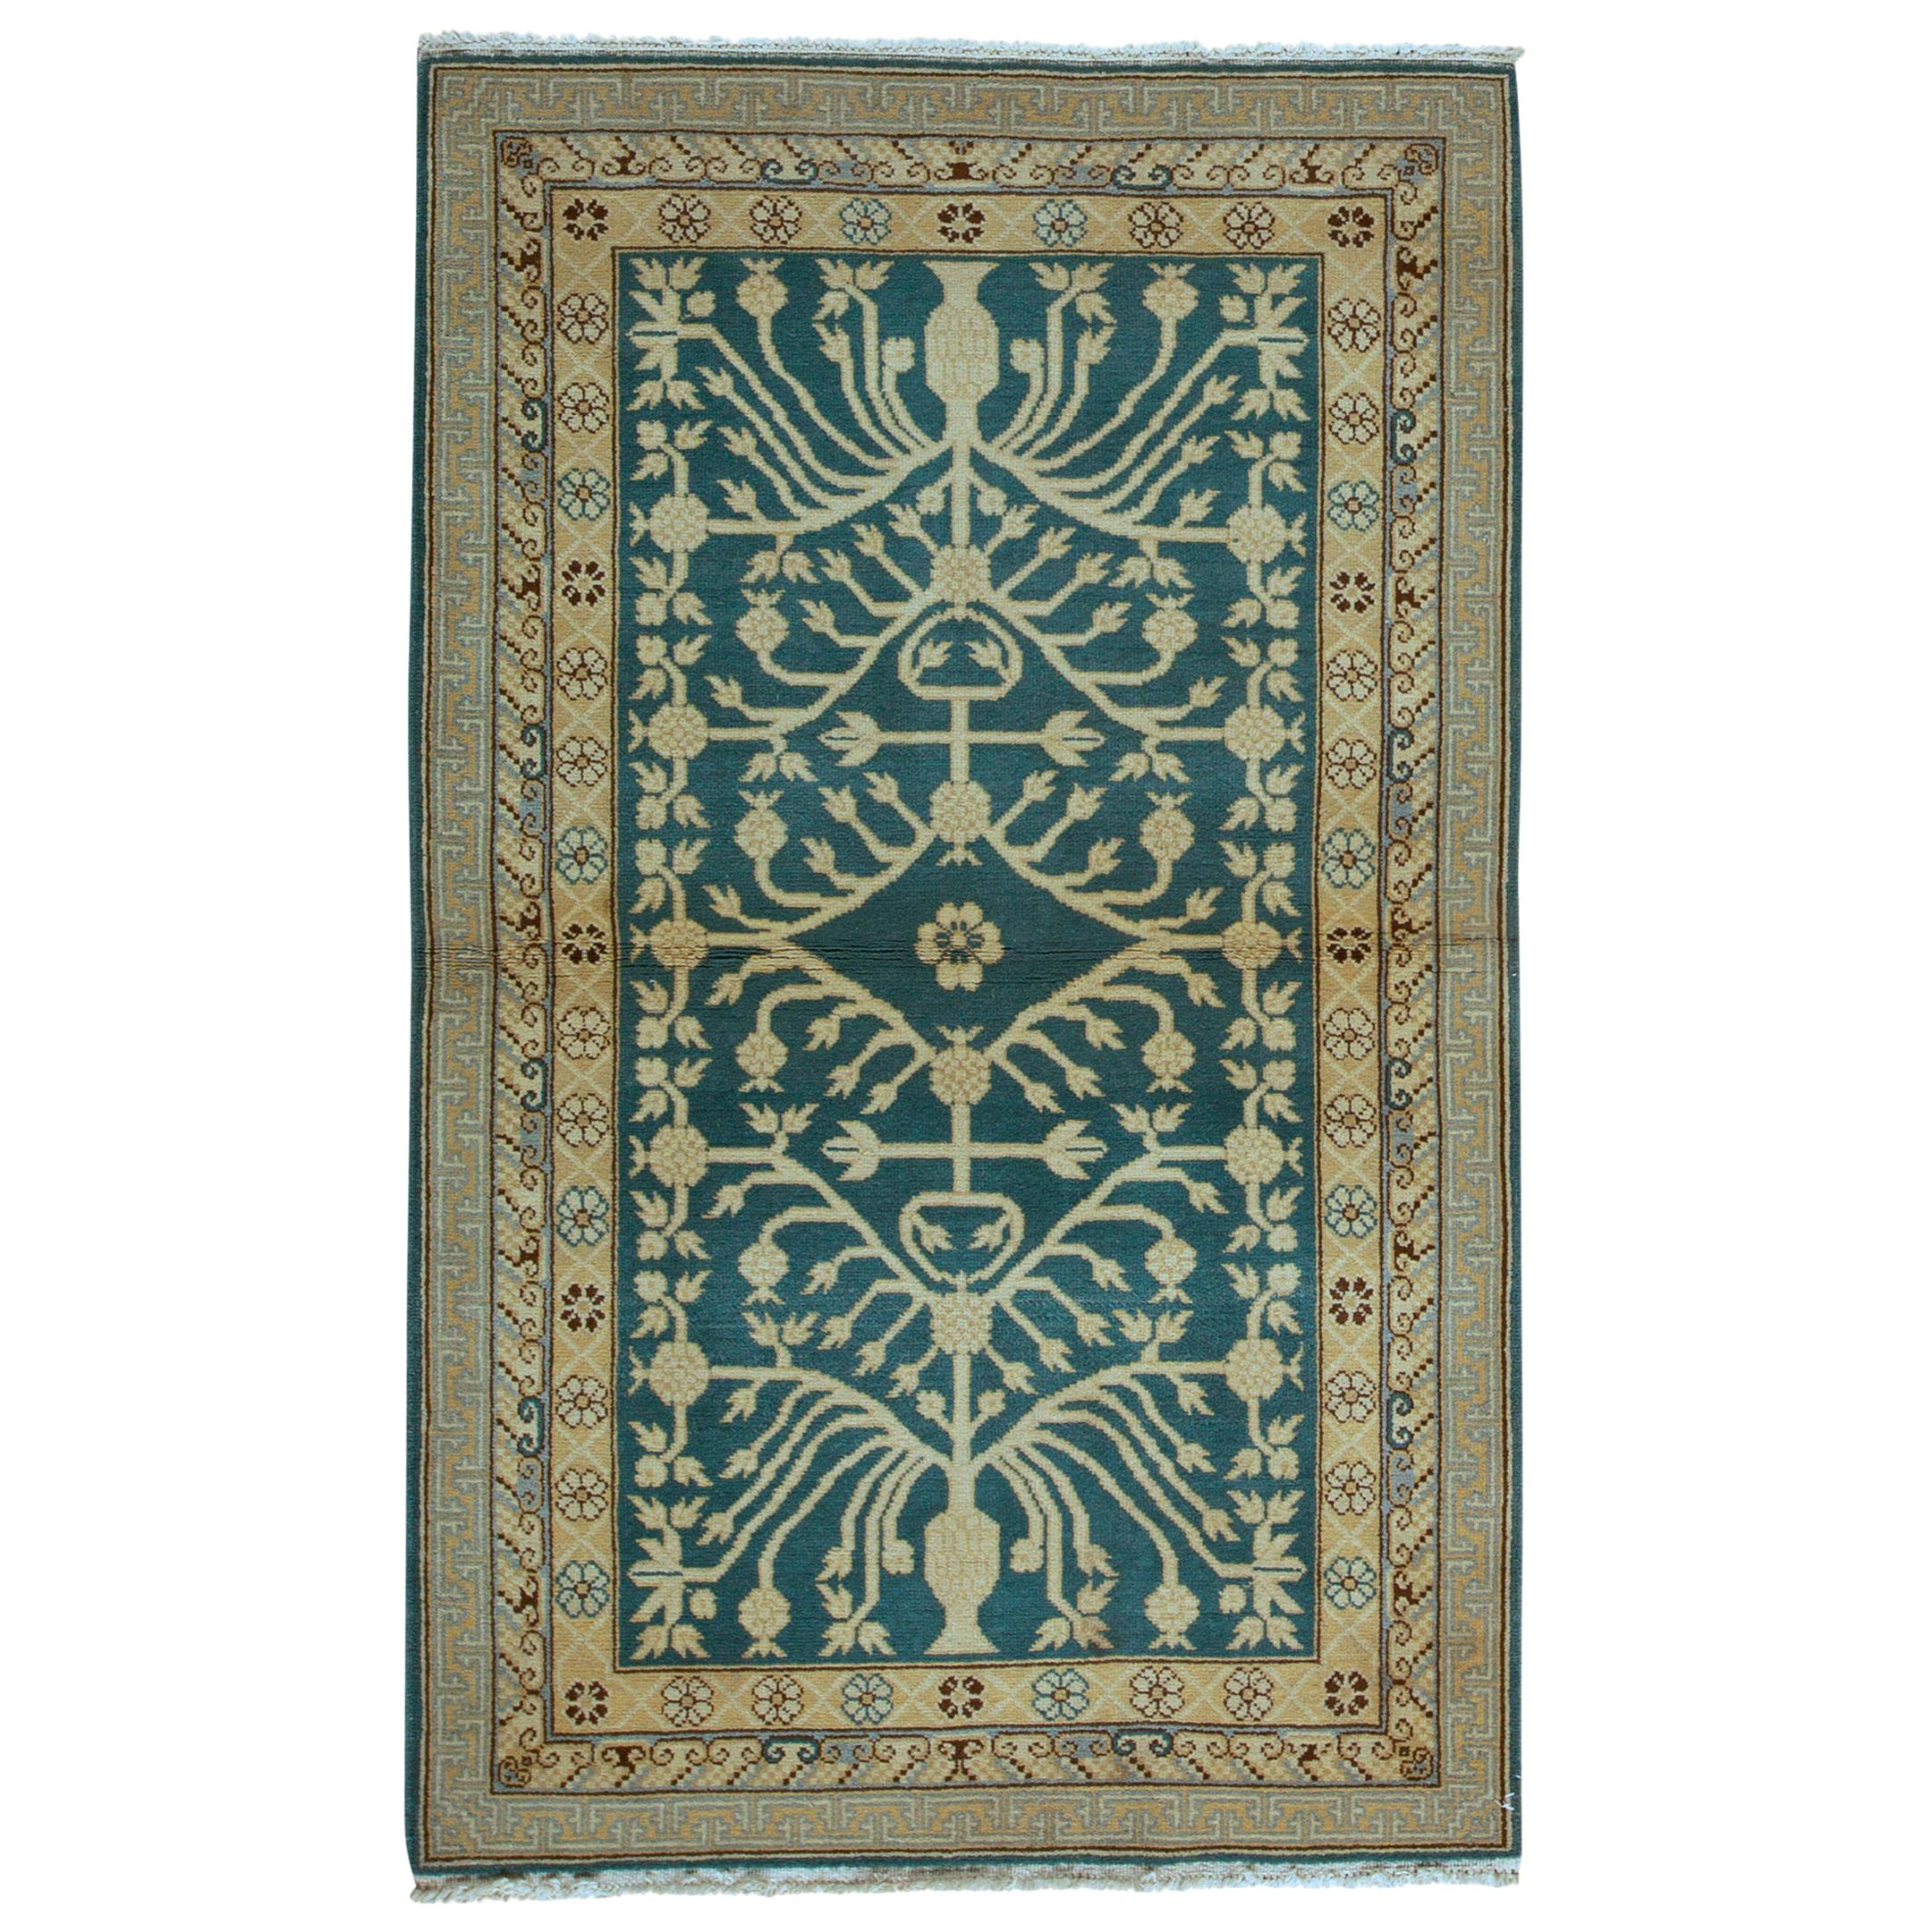  Traditional Handwoven Luxury Wool Semi Antique Blue Rug. For Sale